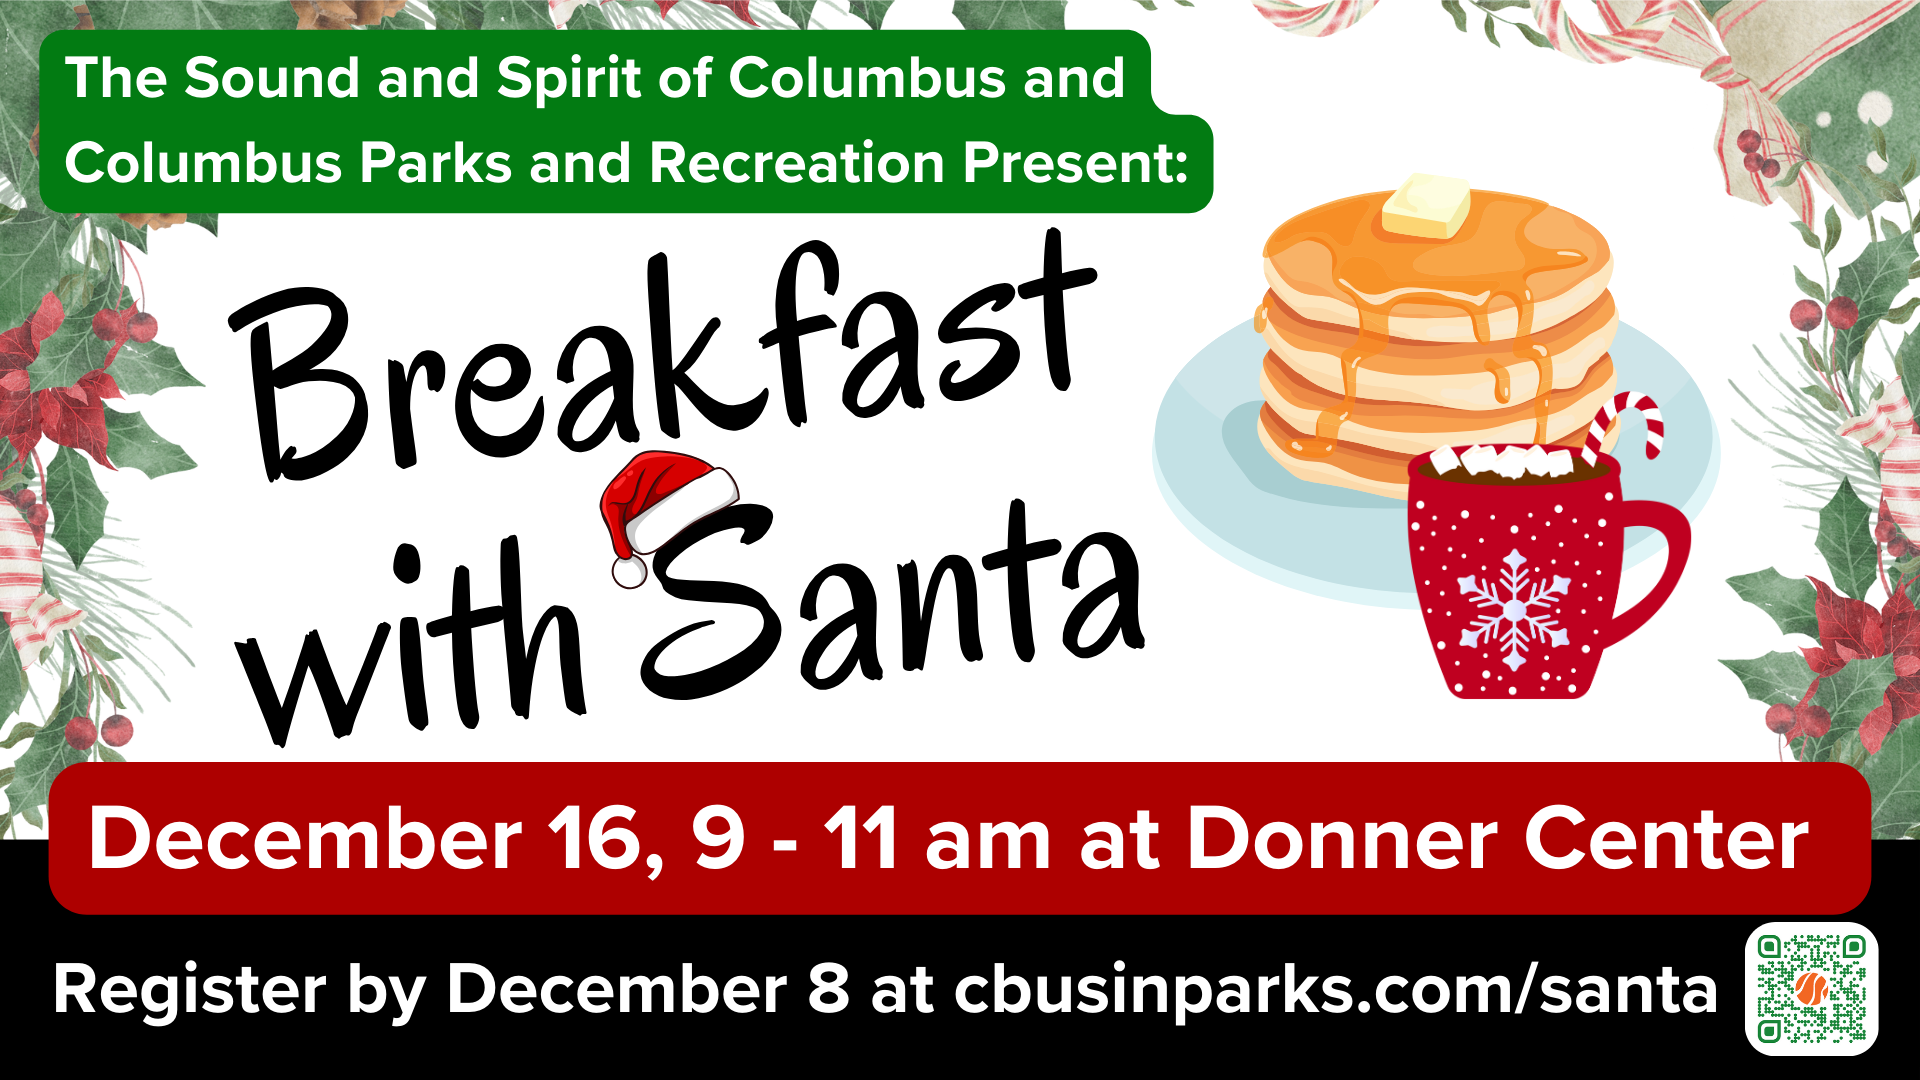 The Sound and Spirit of Columbus and Columbus Parks & Rec Present: Breakfast with Santa. December 16, 9-11am at Donner Center. Register by December 8 at cbusinparks.com/santa